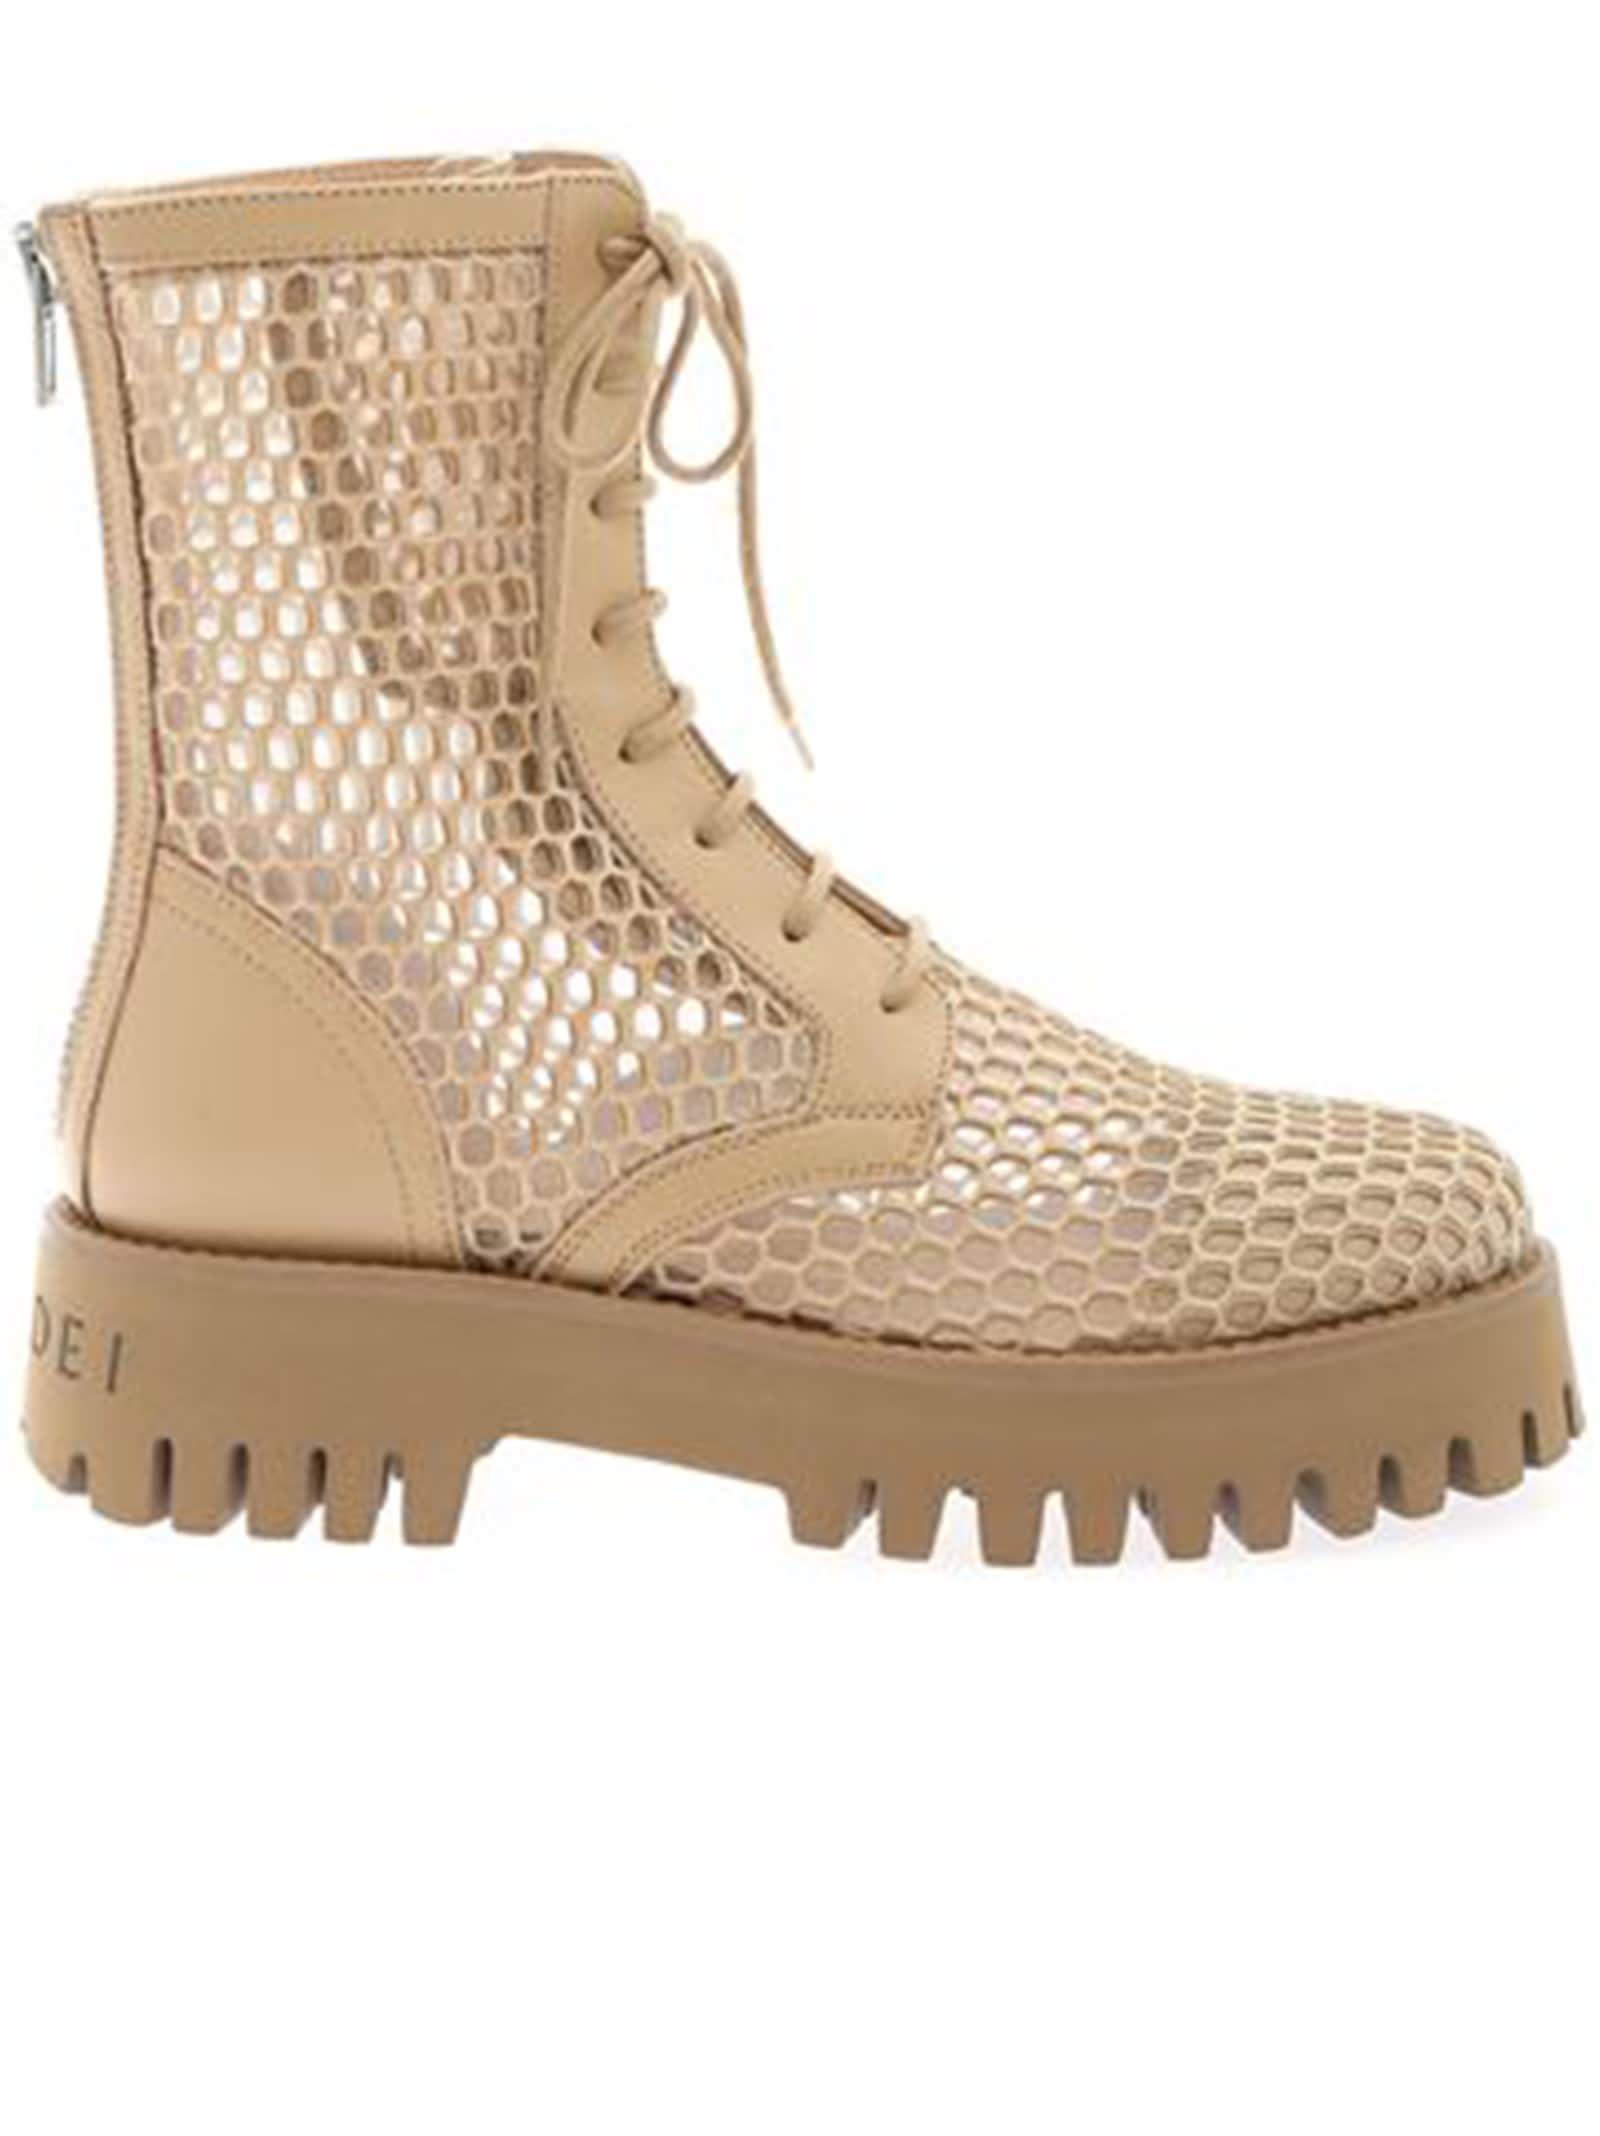 Casadei Beige Leather Ankle Boots